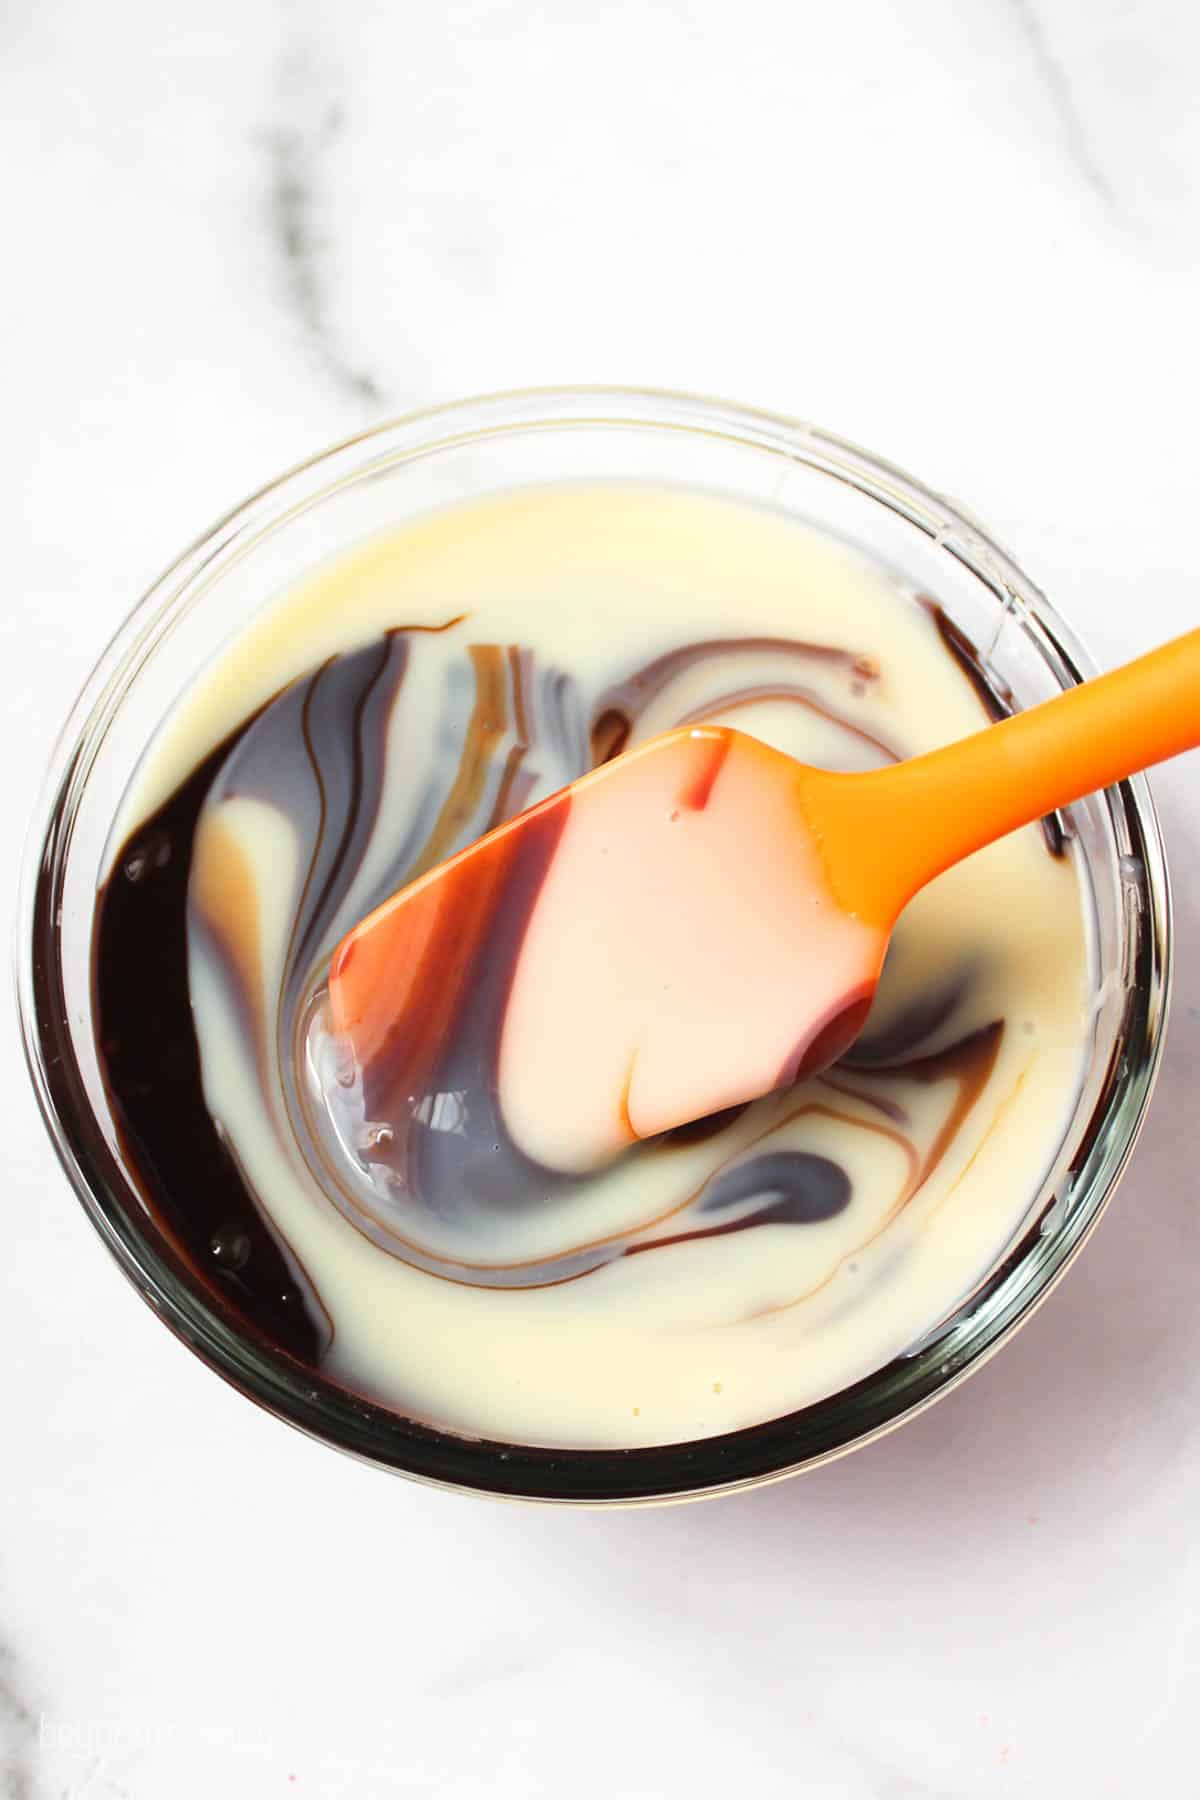 hot fudge sauce and sweetened condensed milk swirled together in a mixing bowl